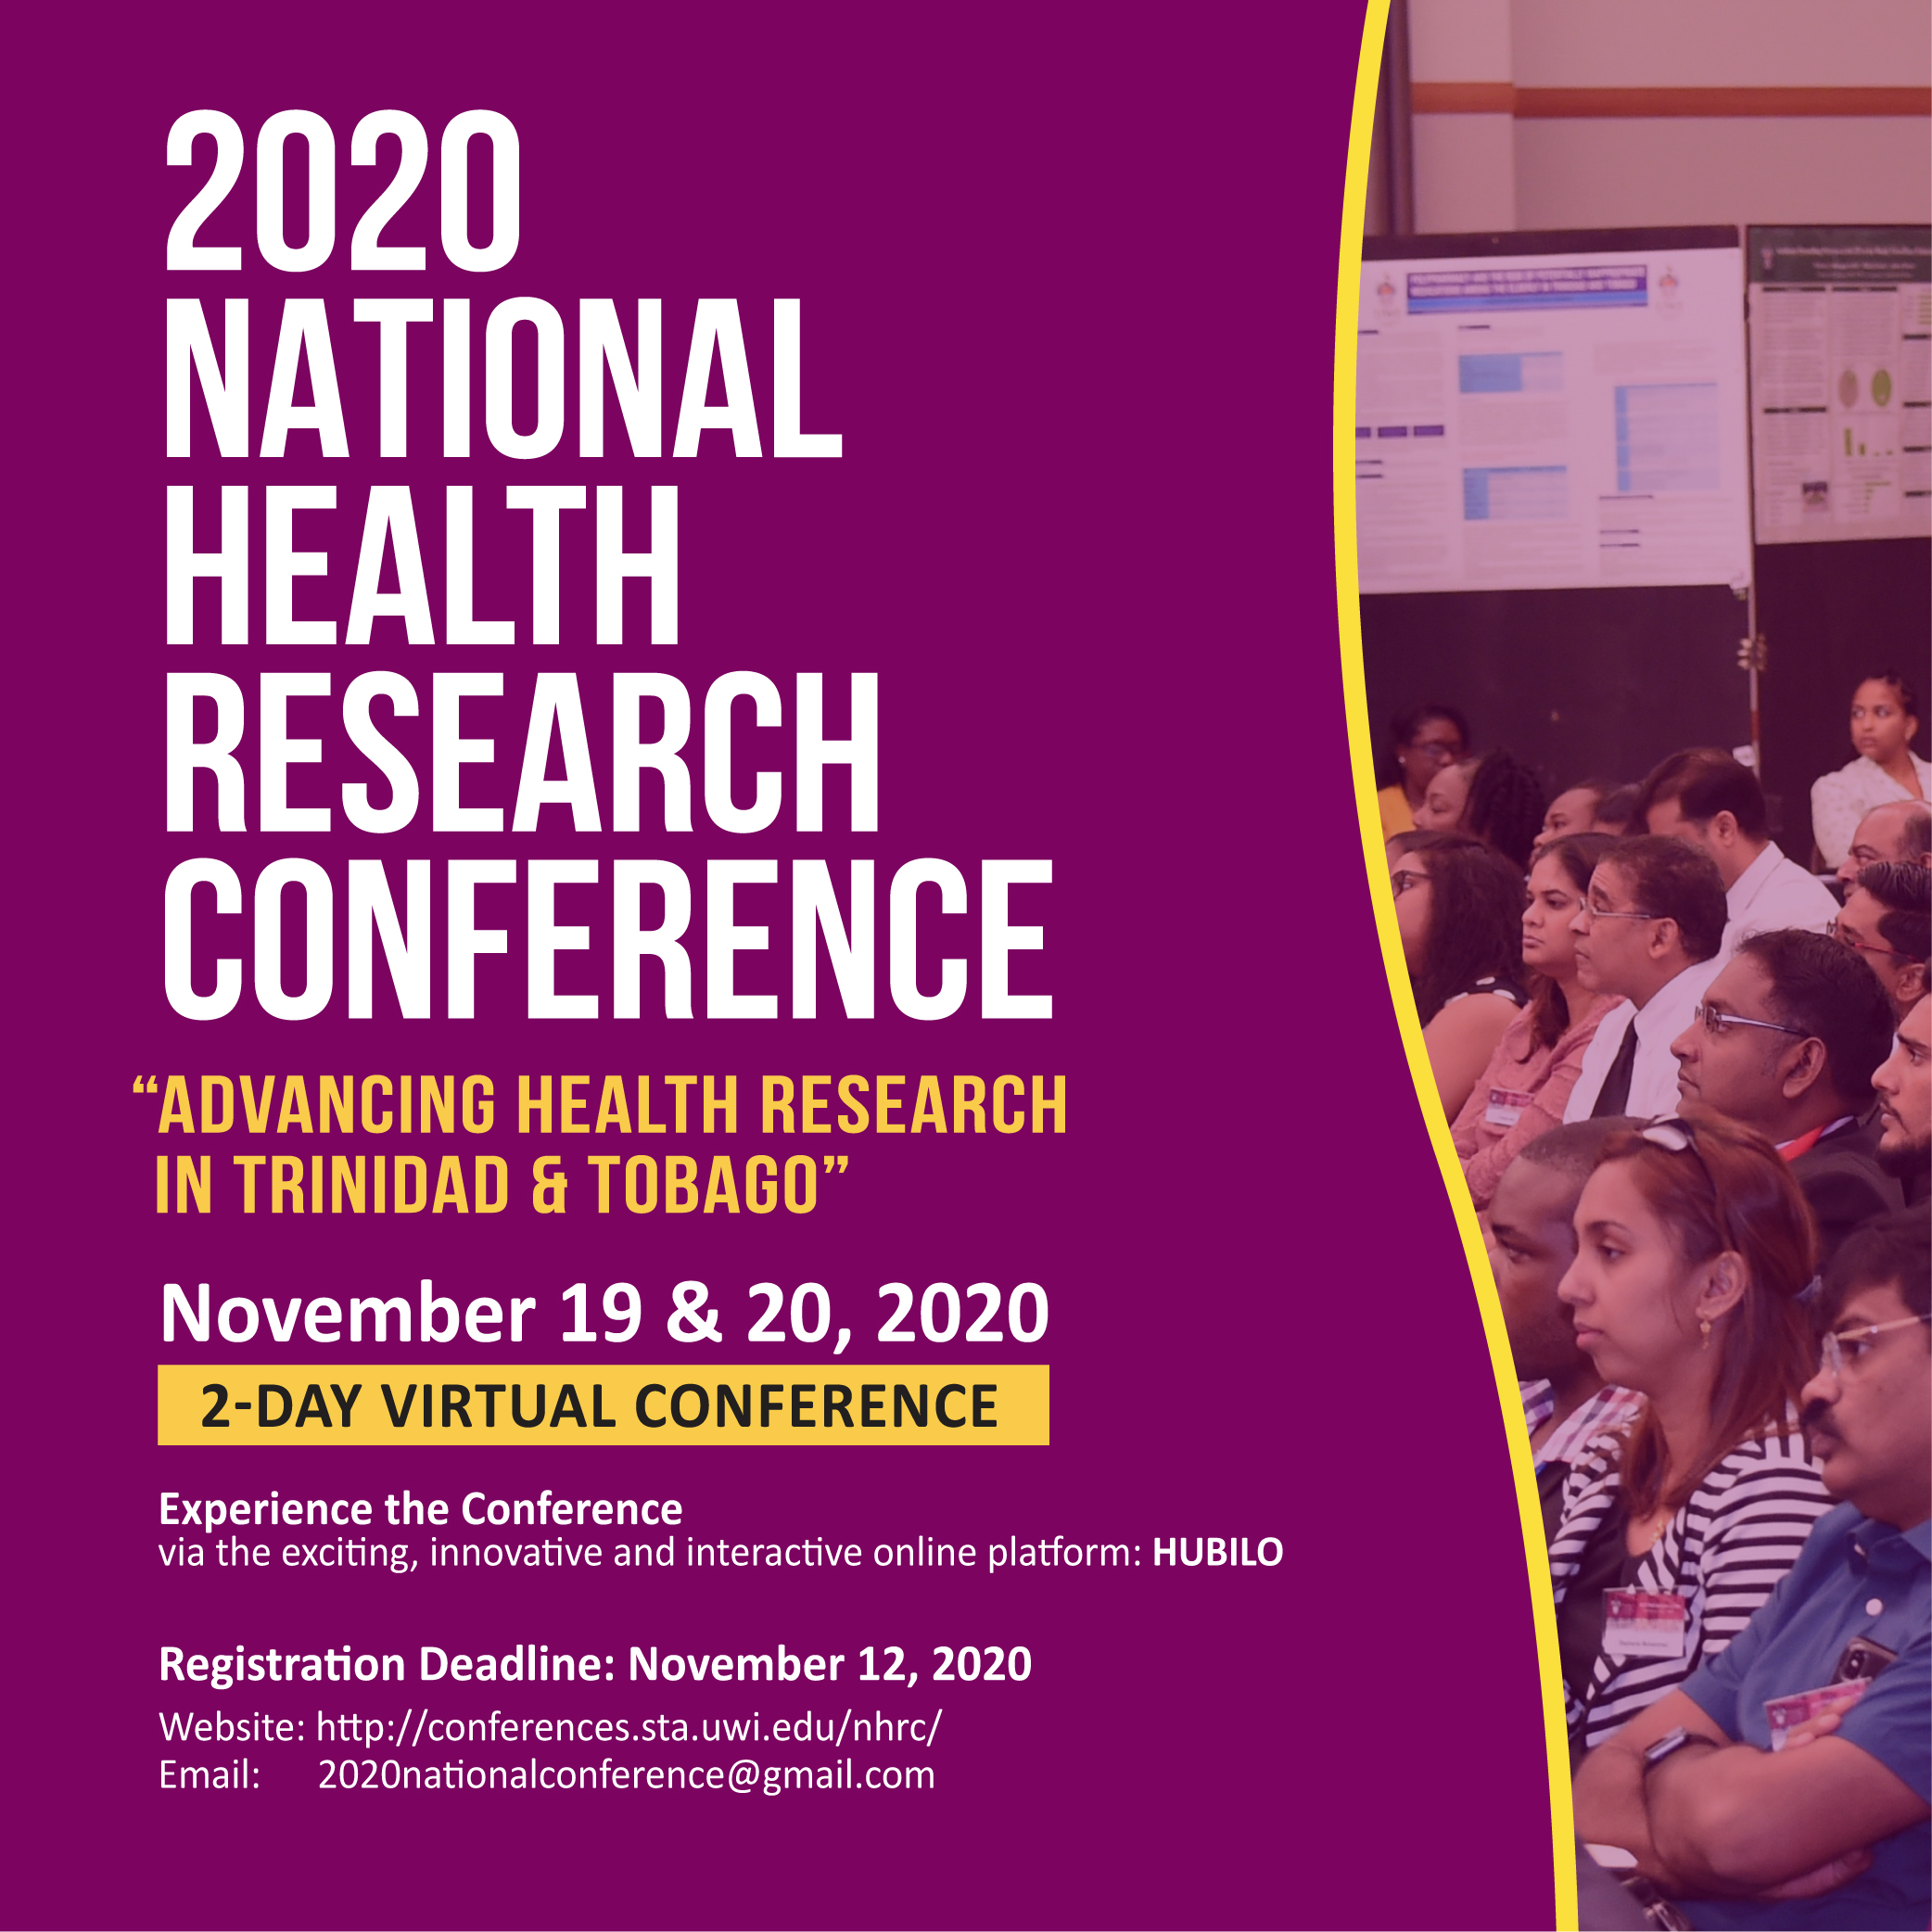 National Health Research Conference 2020